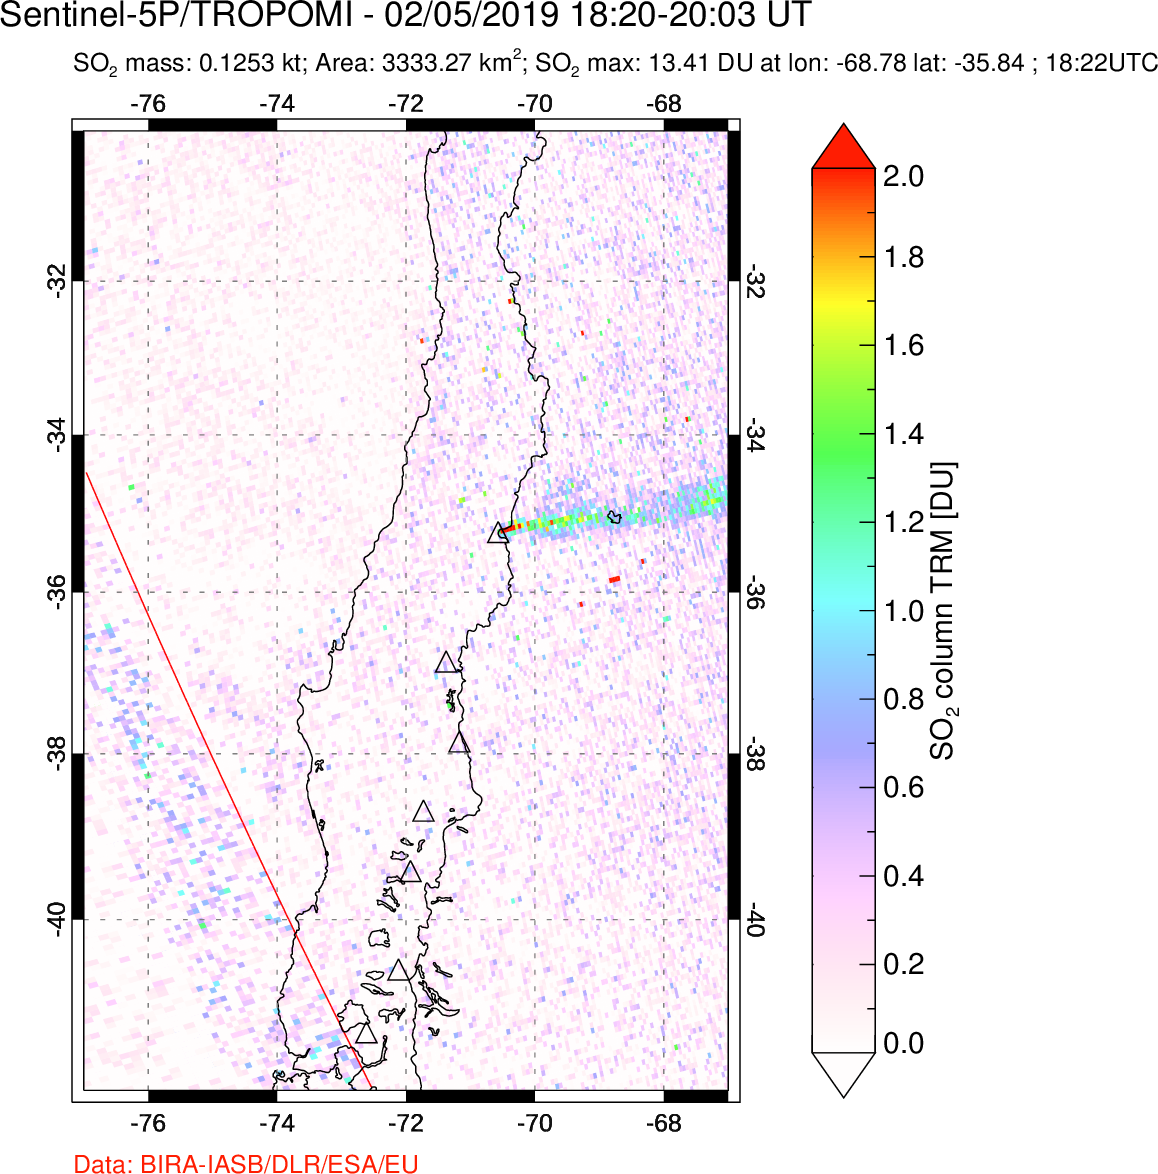 A sulfur dioxide image over Central Chile on Feb 05, 2019.